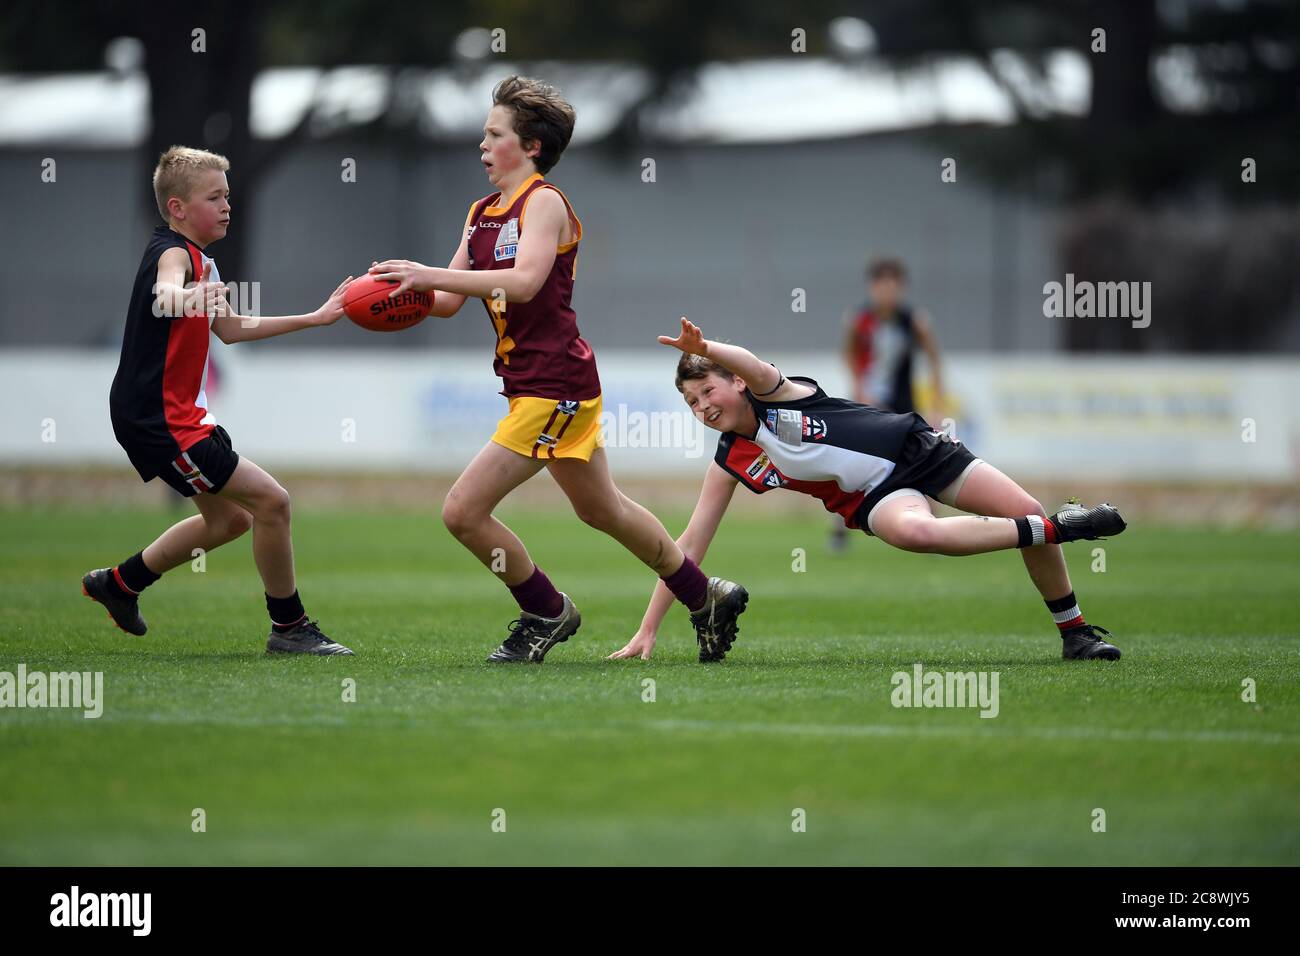 A Wangaratta Imps player makes a run for it during a junior grass roots football final at Wangaratta Oval North East Victoria. Stock Photo